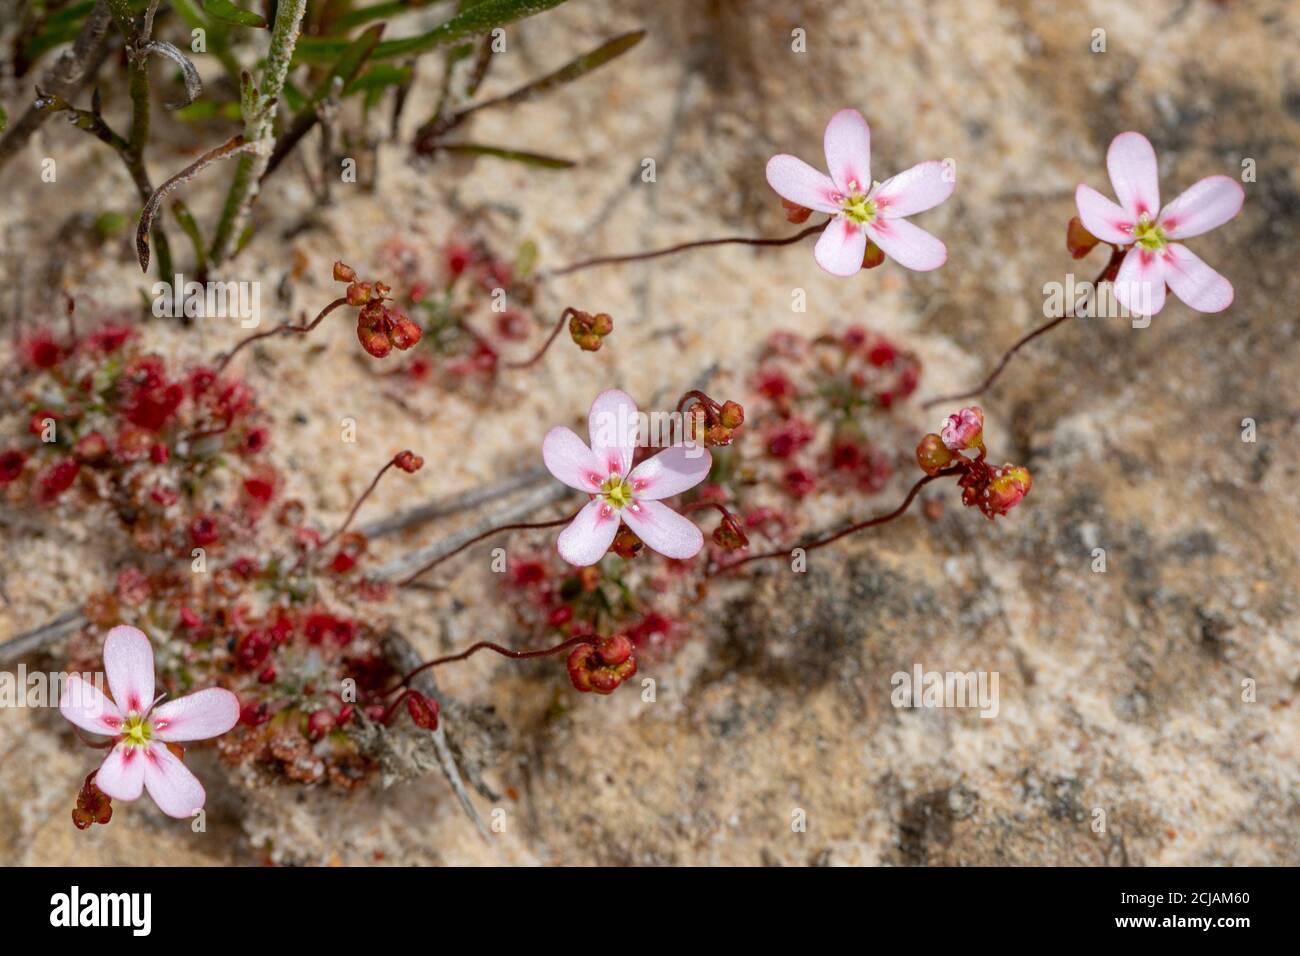 The carnivorous plant Drosera spilos (Sundew) with its flower, seen east of Jurien Bay in Western Australia Stock Photo